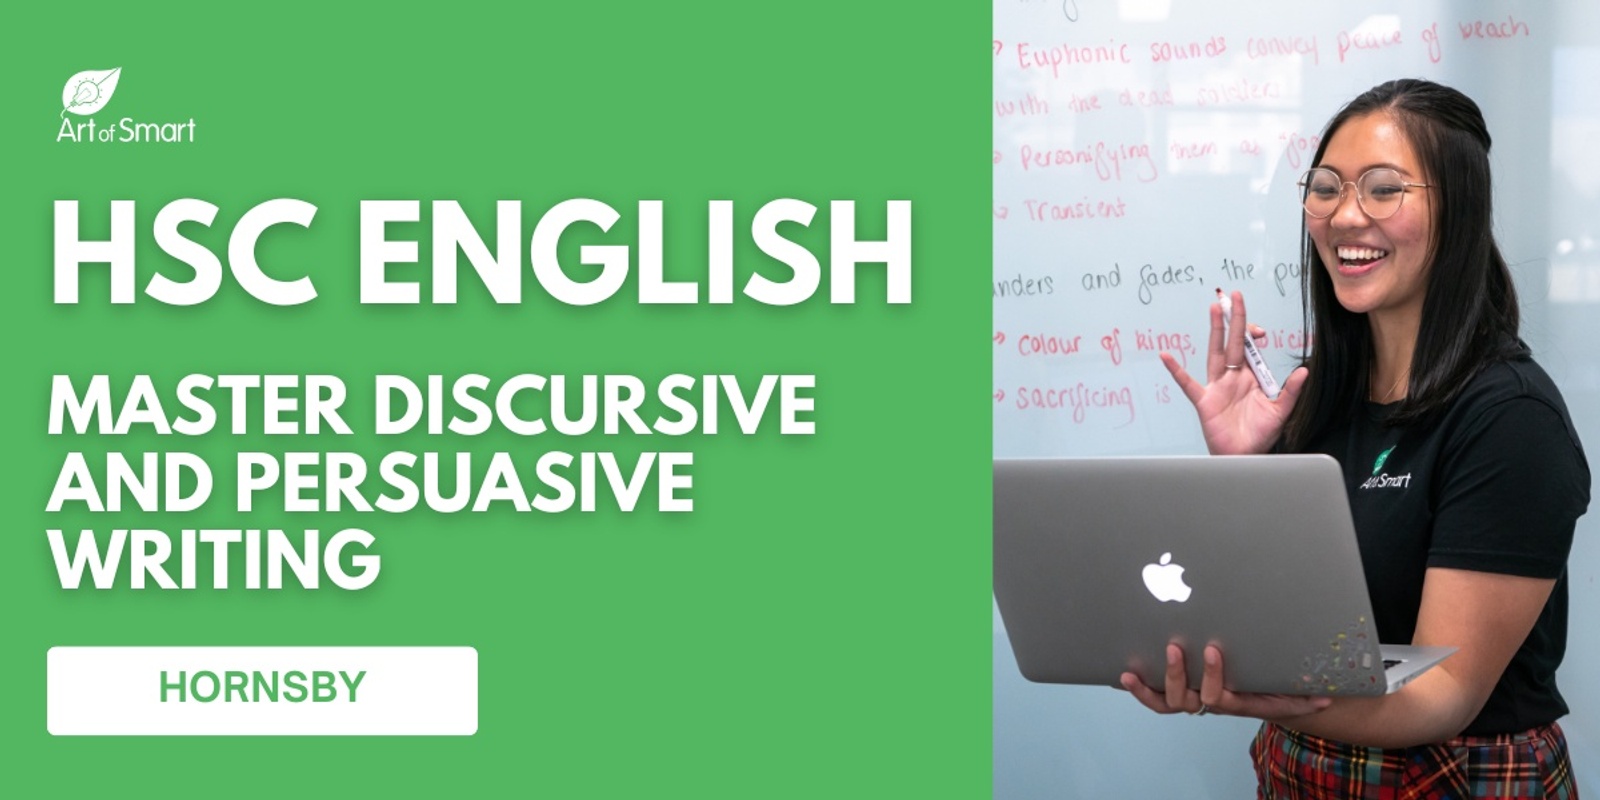 Banner image for HSC English - Master Discursive and Persuasive Writing [HORNSBY CAMPUS]